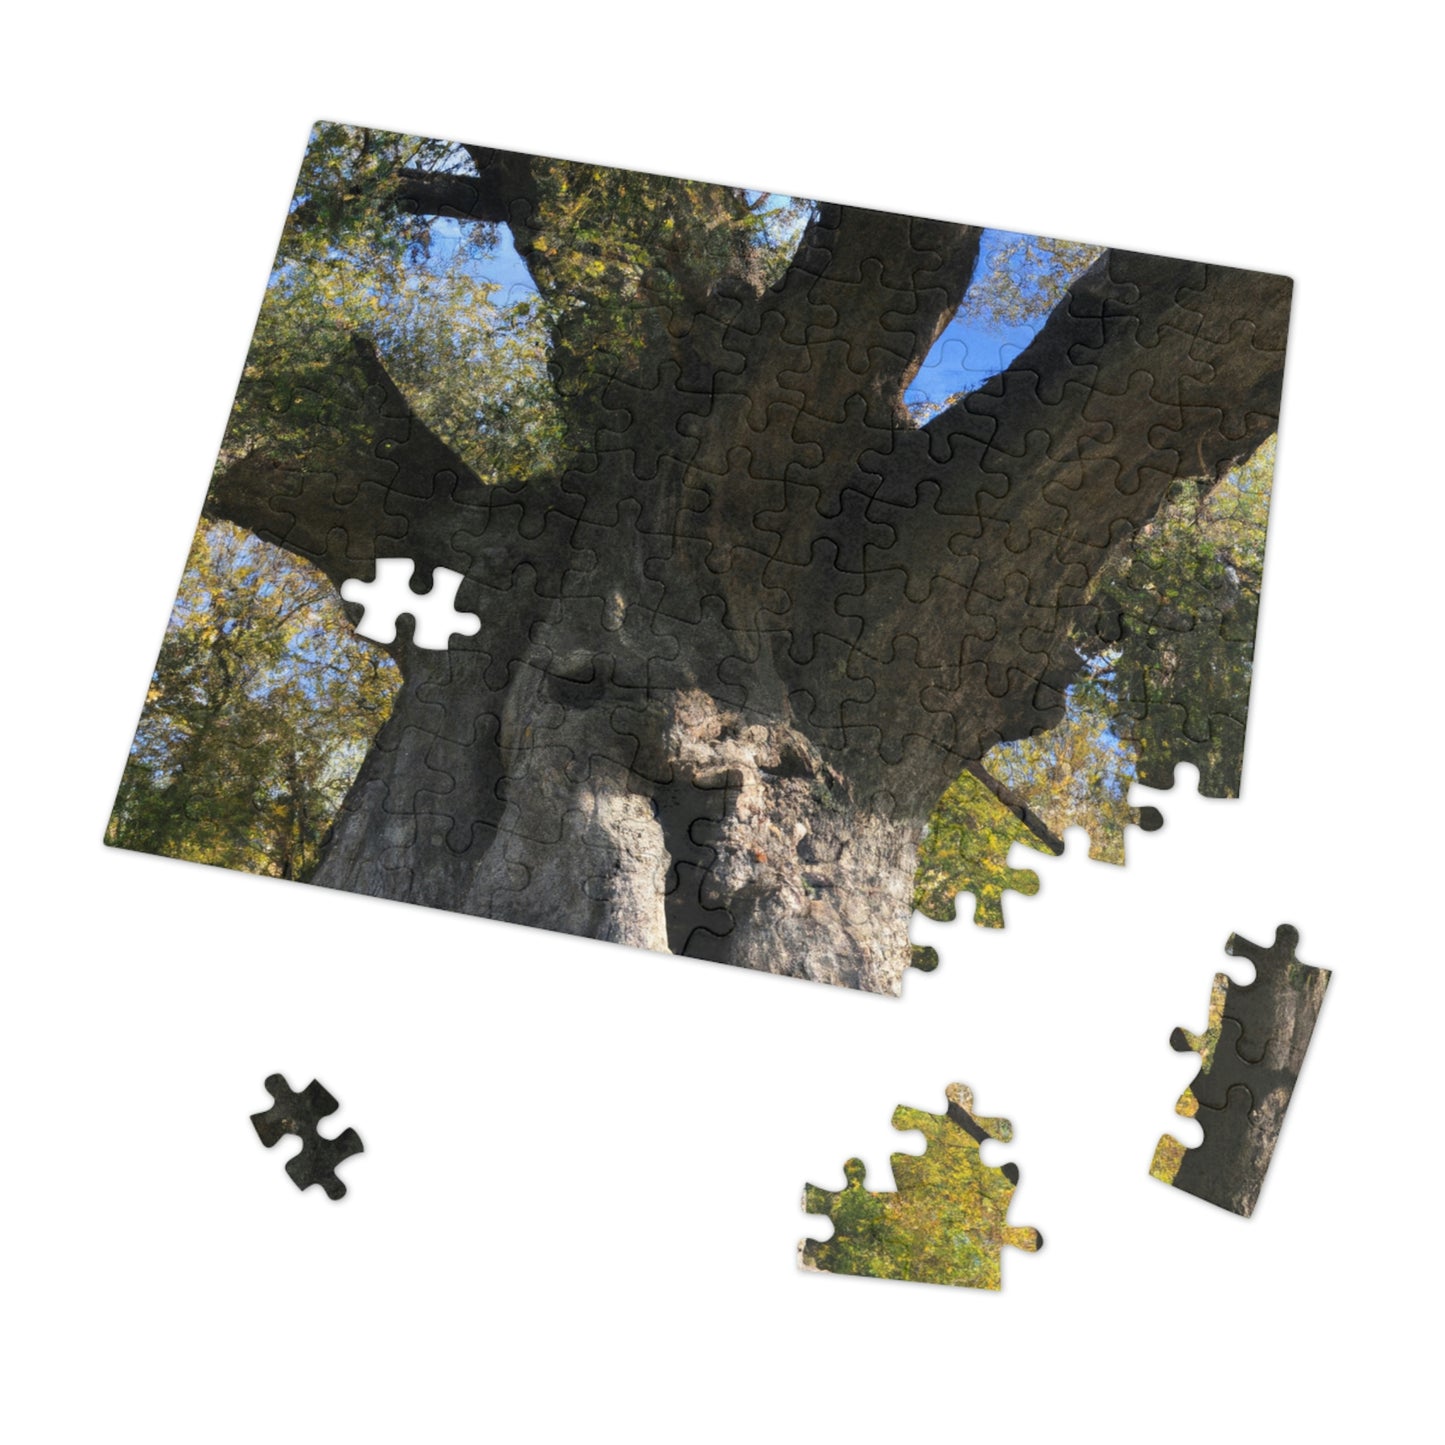 "The Great Guardian Tree" - The Alien Jigsaw Puzzle